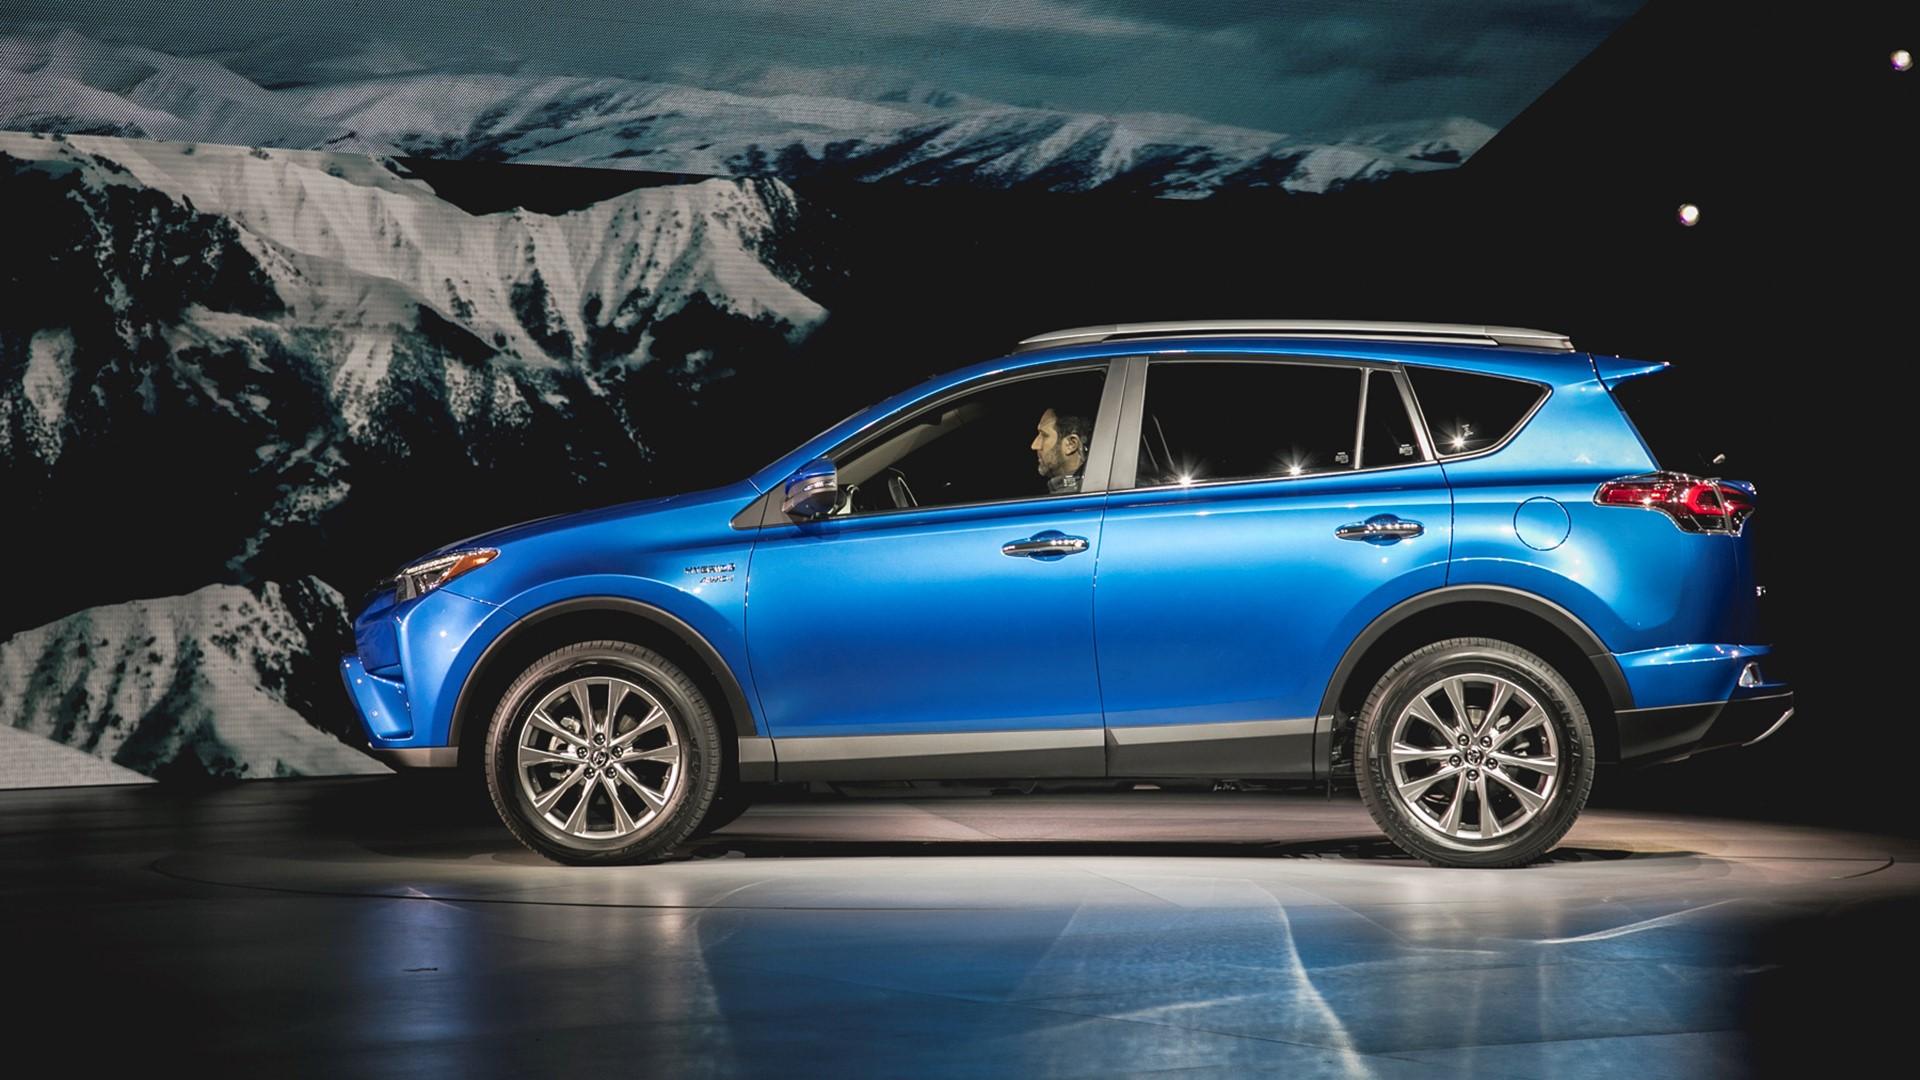 Toyota Rav4 Wallpaper HD Photo, Wallpaper and other Image